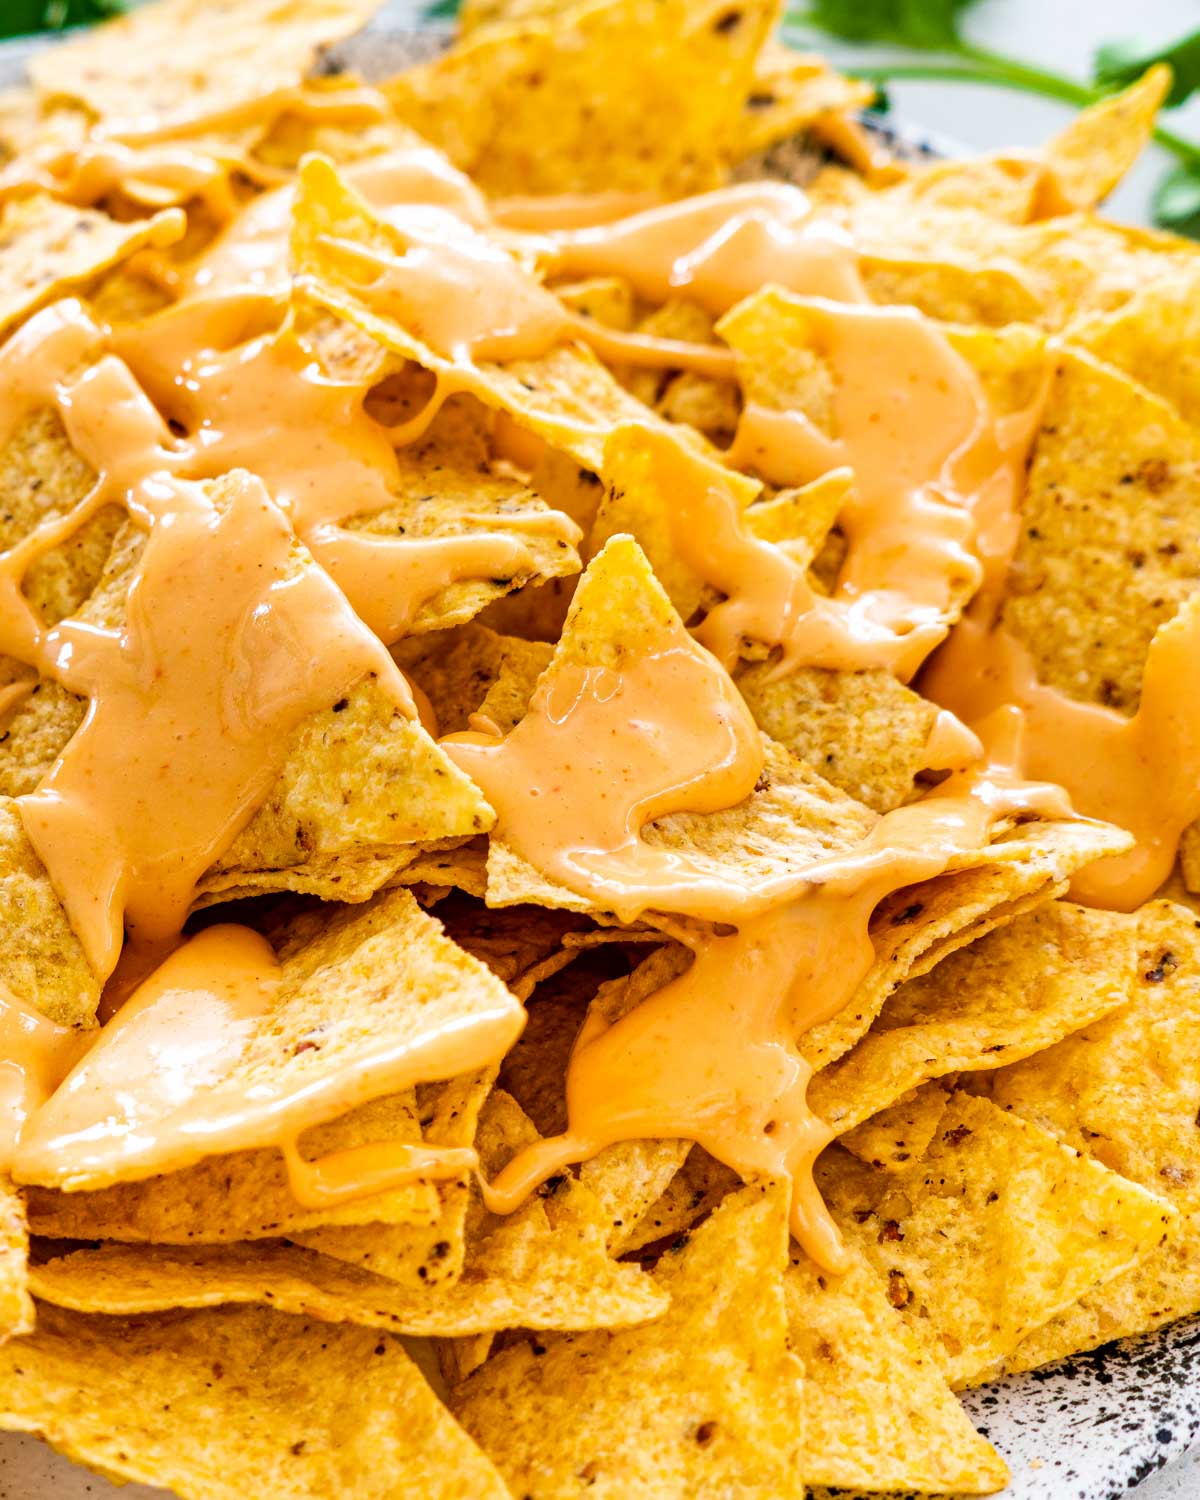 a plate full of tortilla chips drizzled with nacho cheese sauce.